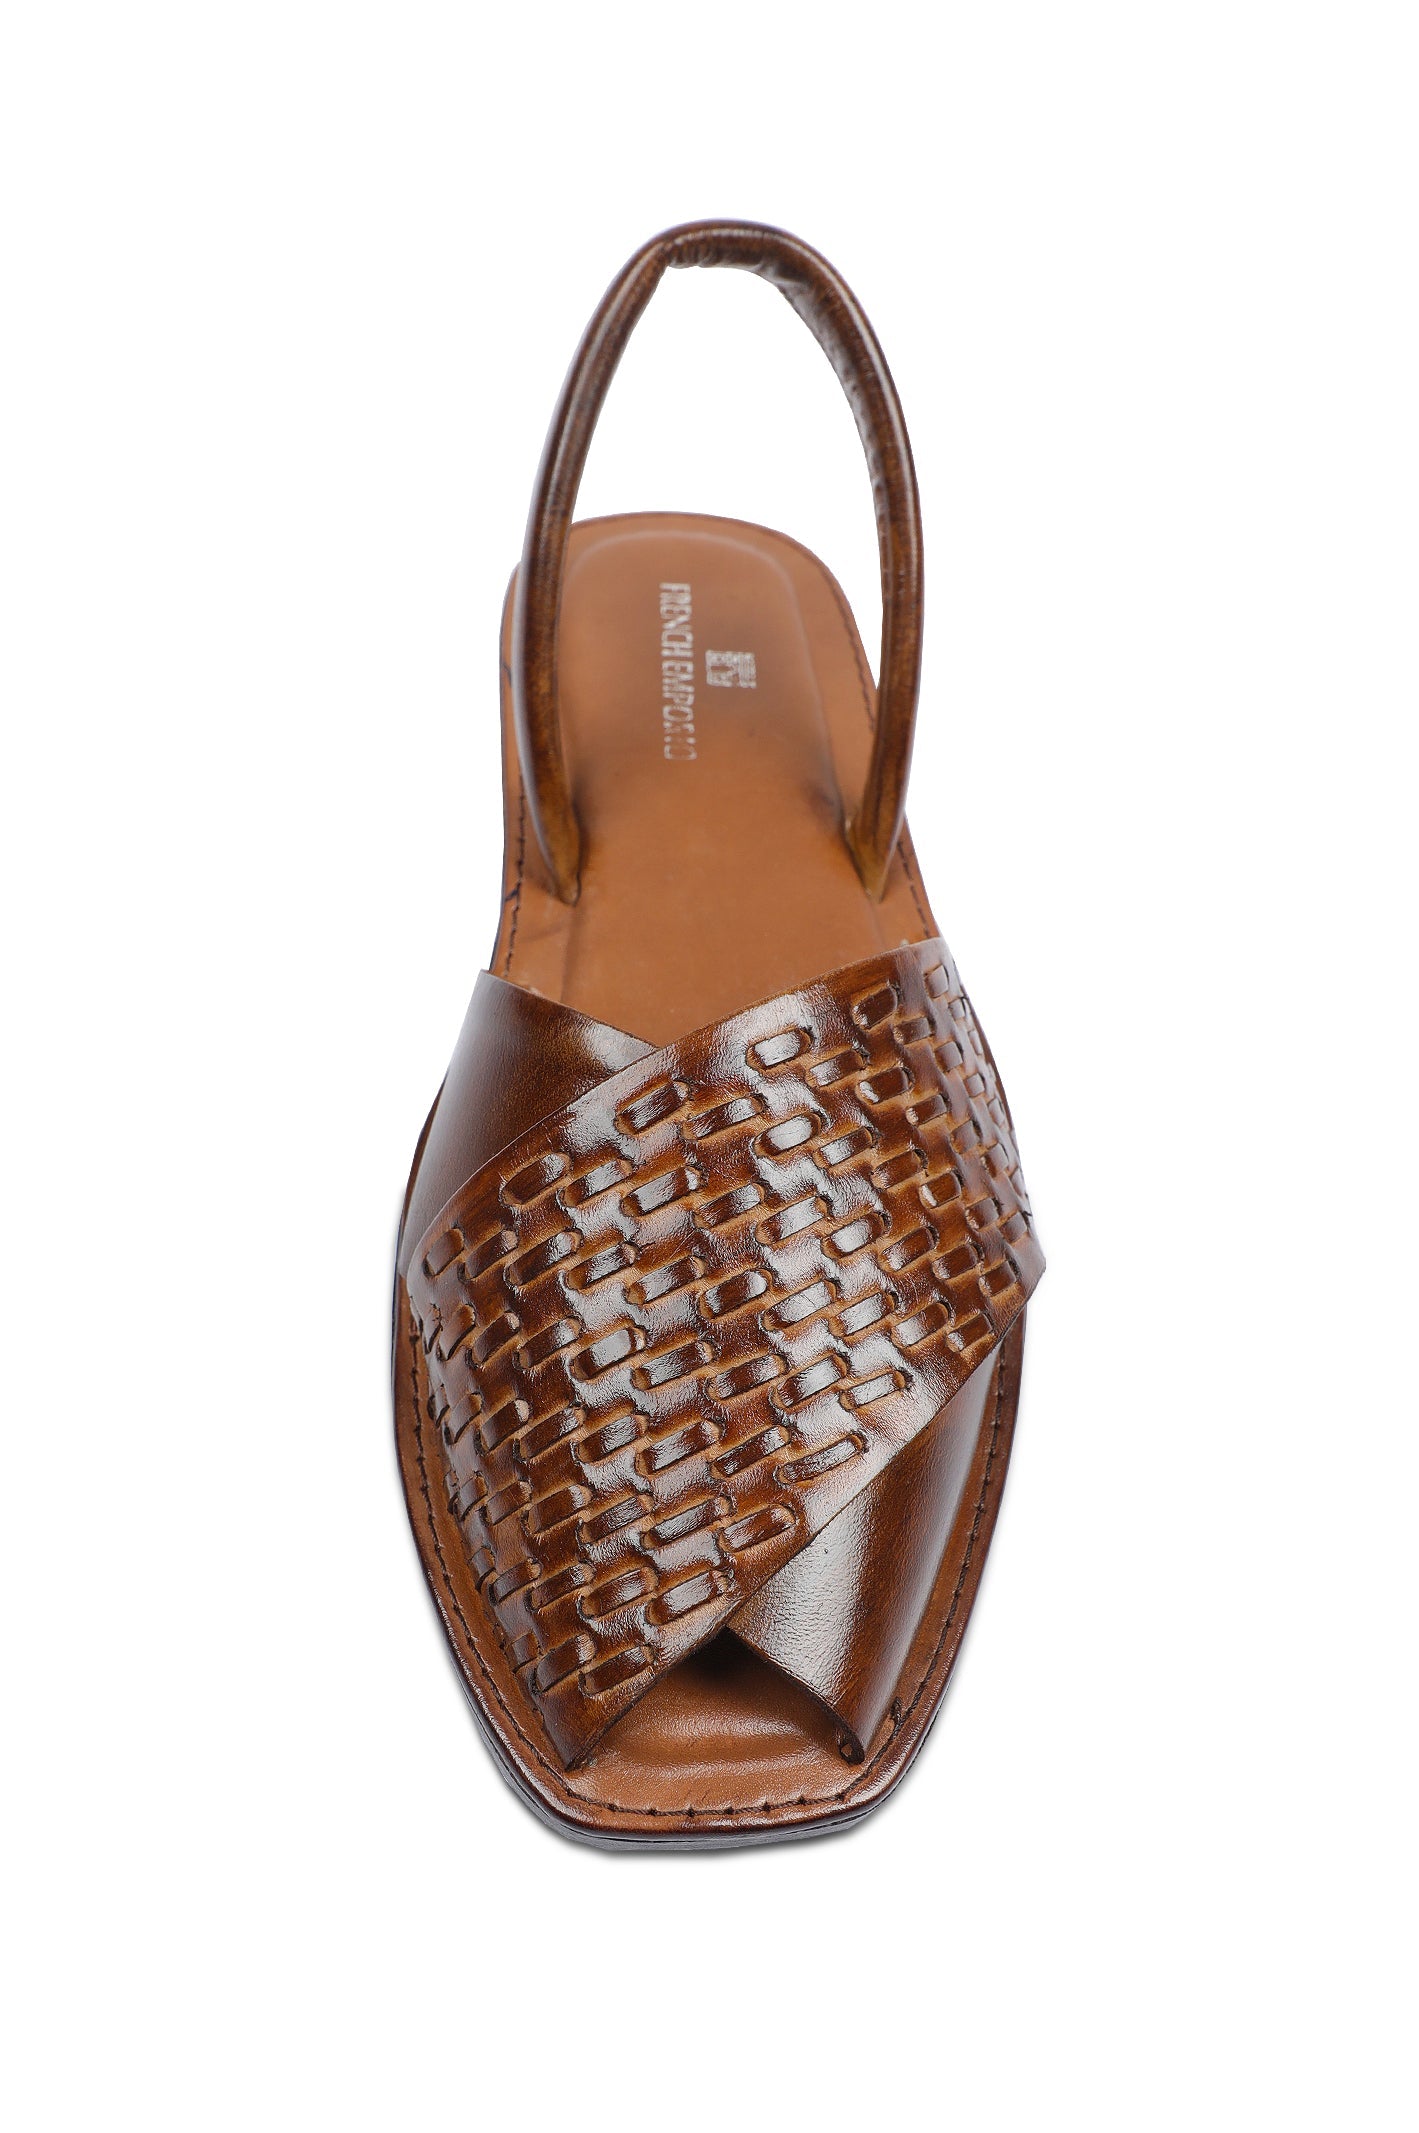 French Emporio Men Sandals SKU: SLD-0035-TAN - Diners